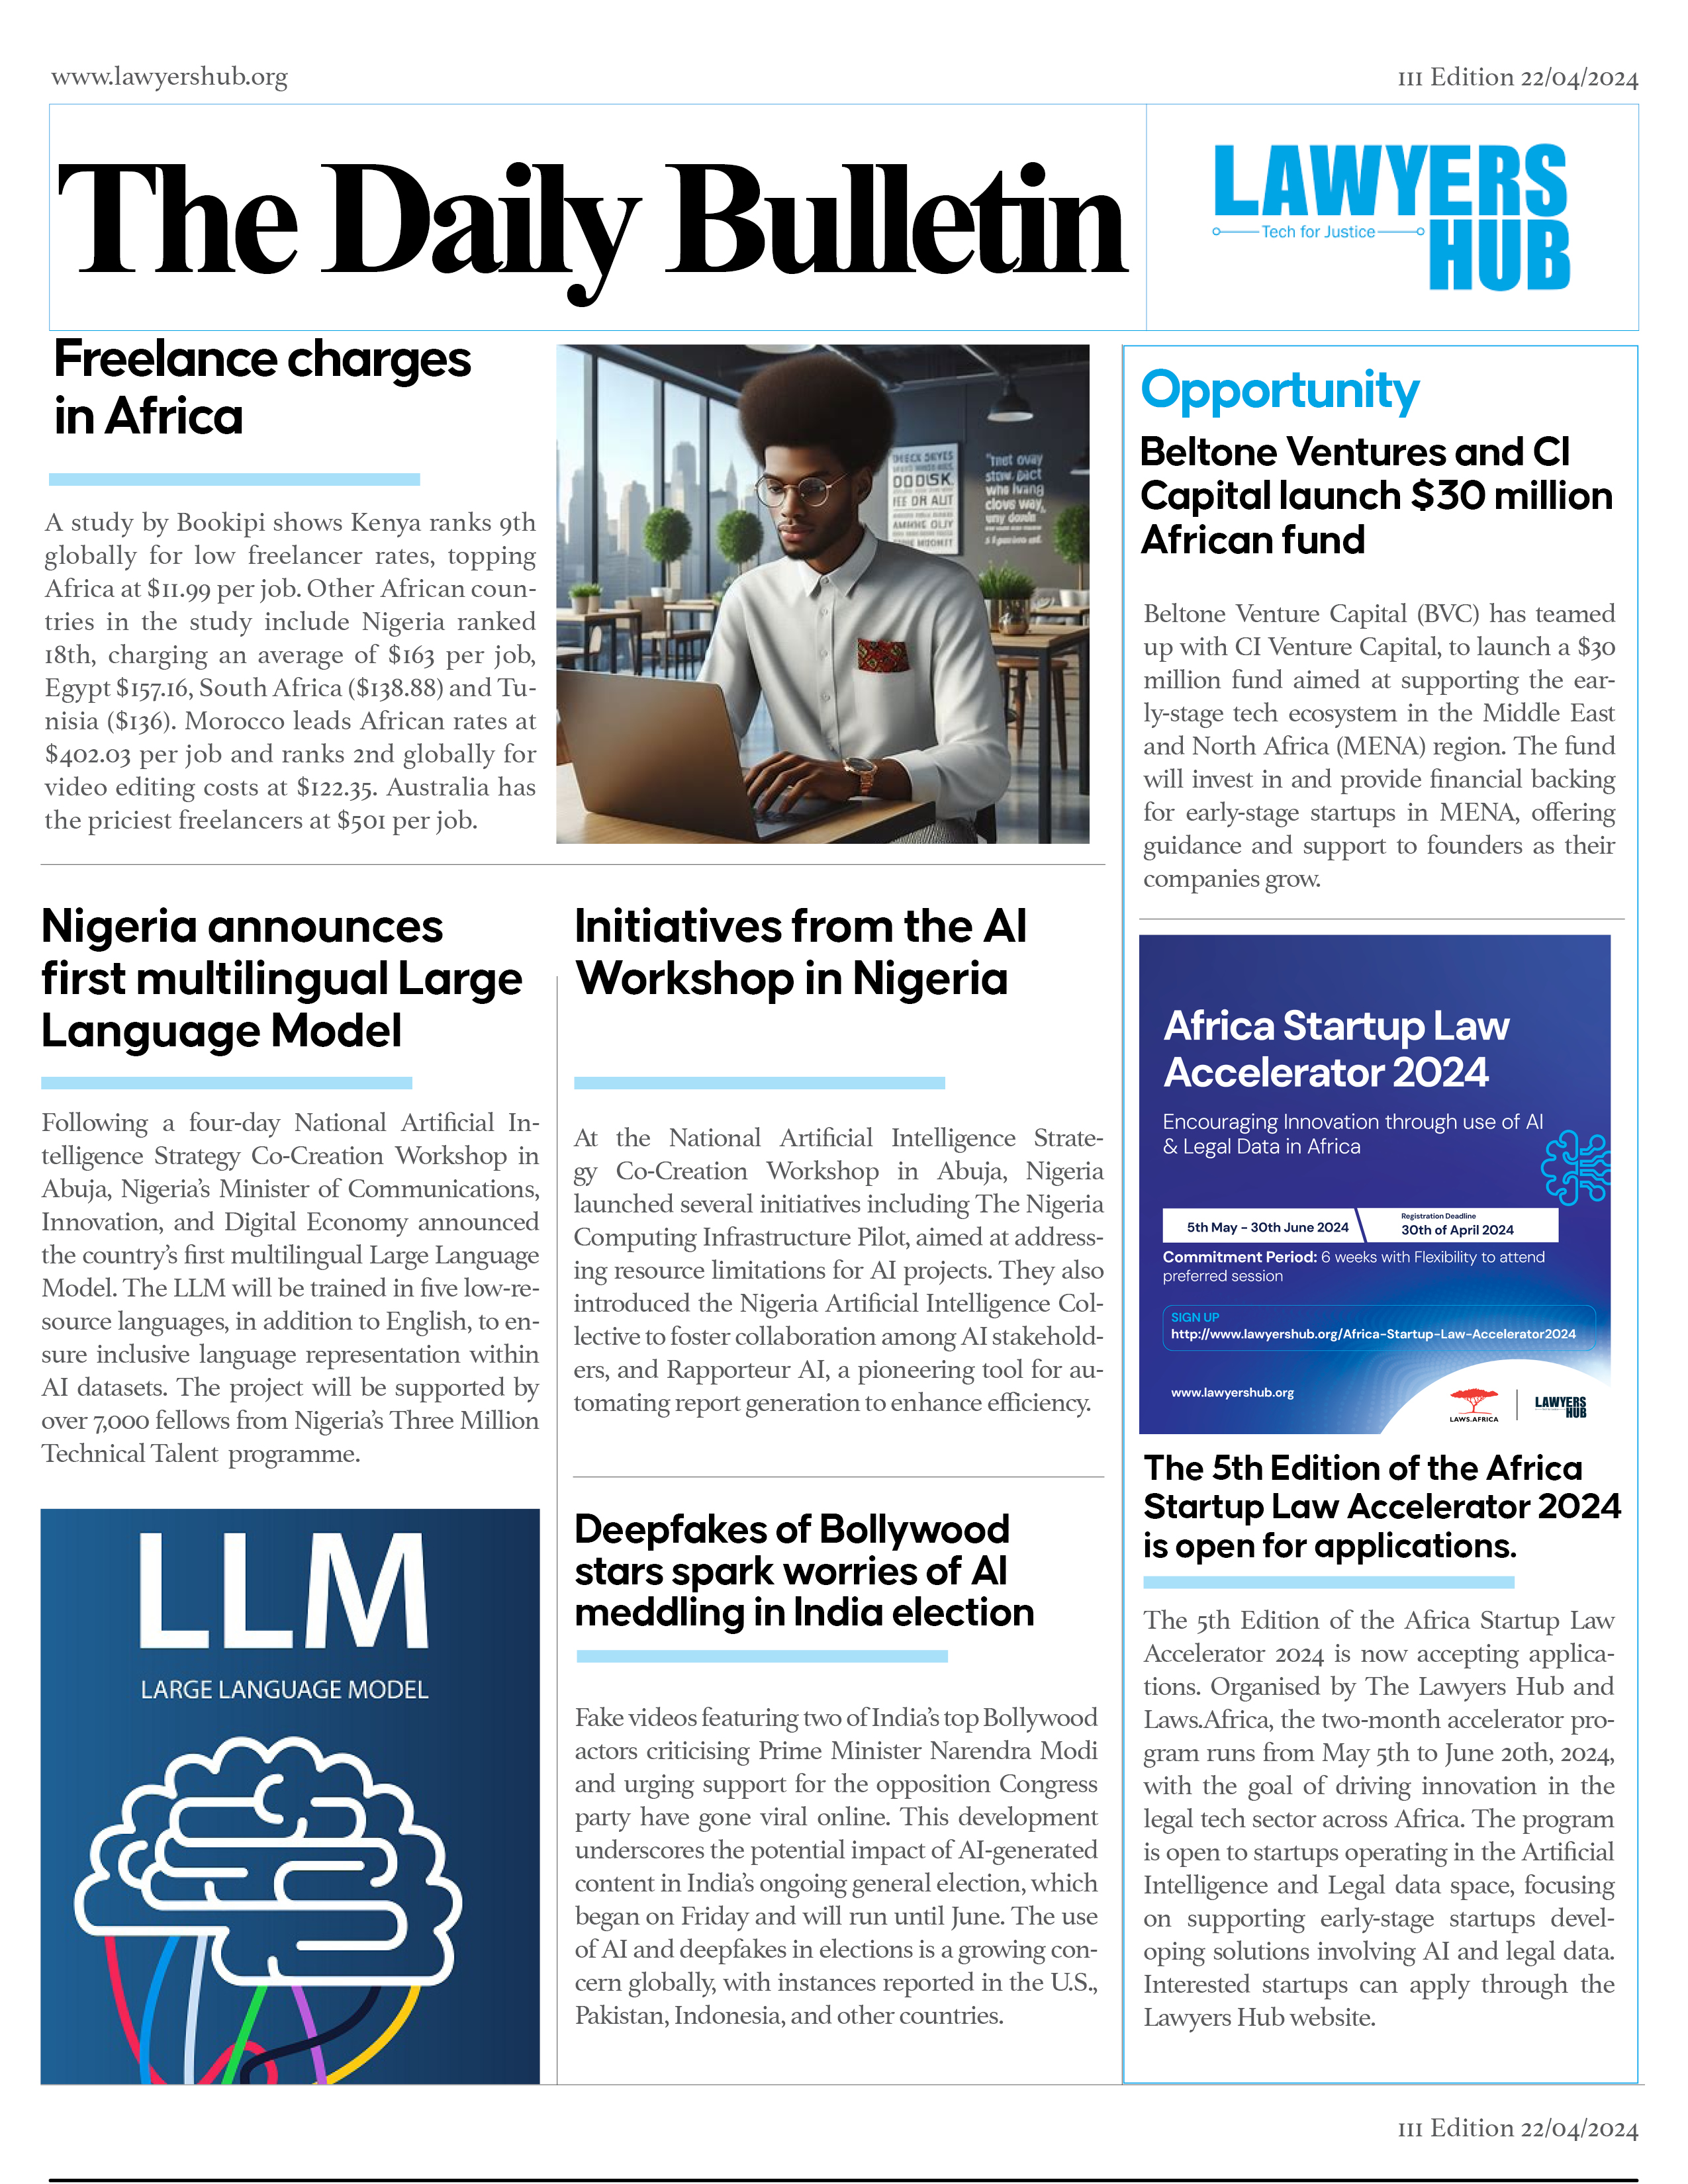 Headlines: Freelance charges in Africa; Nigeria announces first multilingual large language model; initiatives from the AI workshop in Nigeria; Deepfakes of bollywood stars spark worries of AI meddling in India election; The 5th Edition of the Africa Startup Law Accelerator 2024 is open for applications; Beltone Ventures and CI Capital launch $30 Million Africa fund